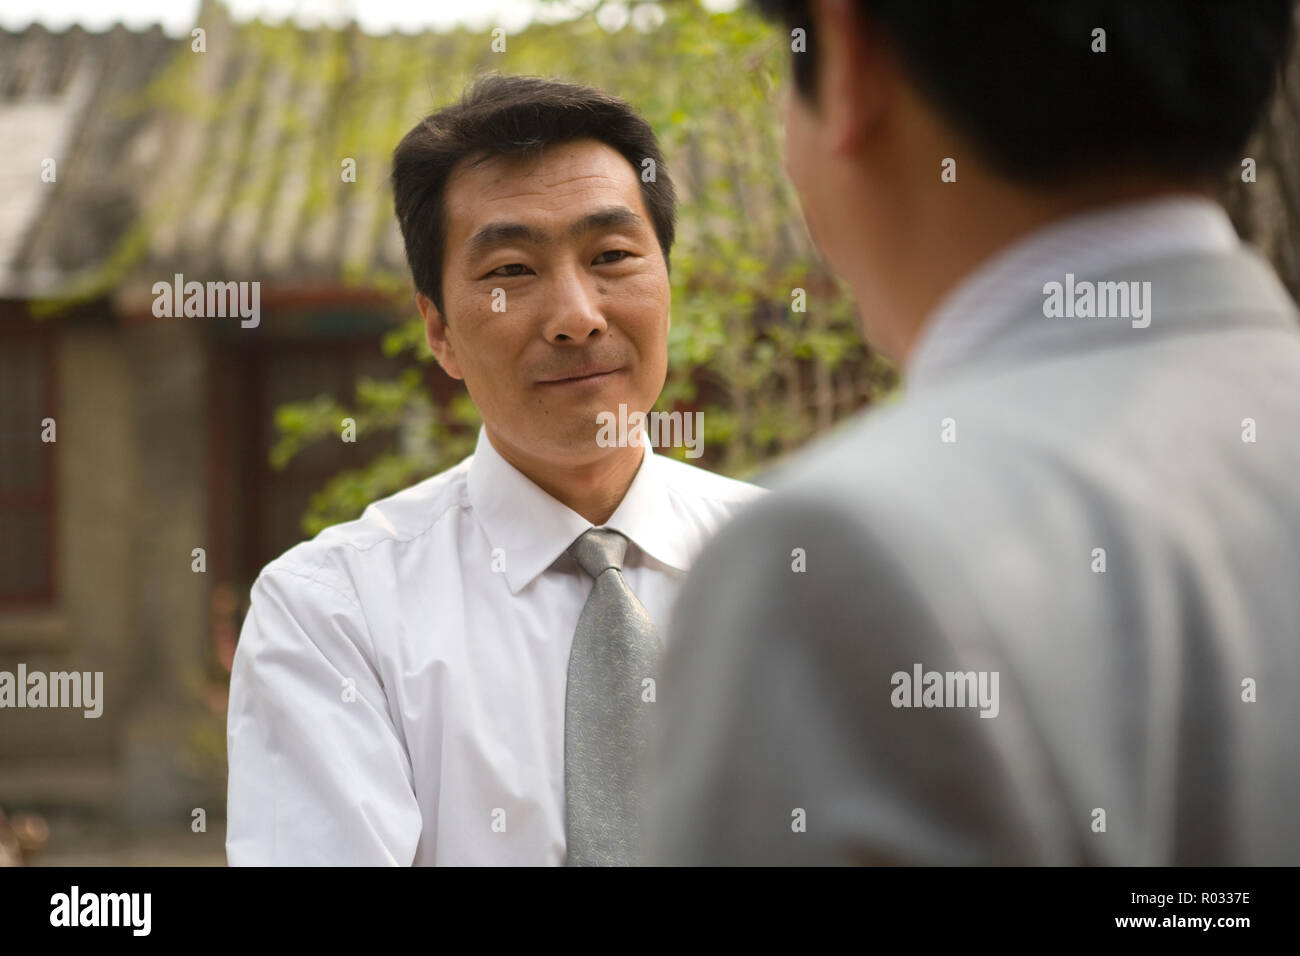 Mid-adult businessman greeting a colleague outside a building. Stock Photo